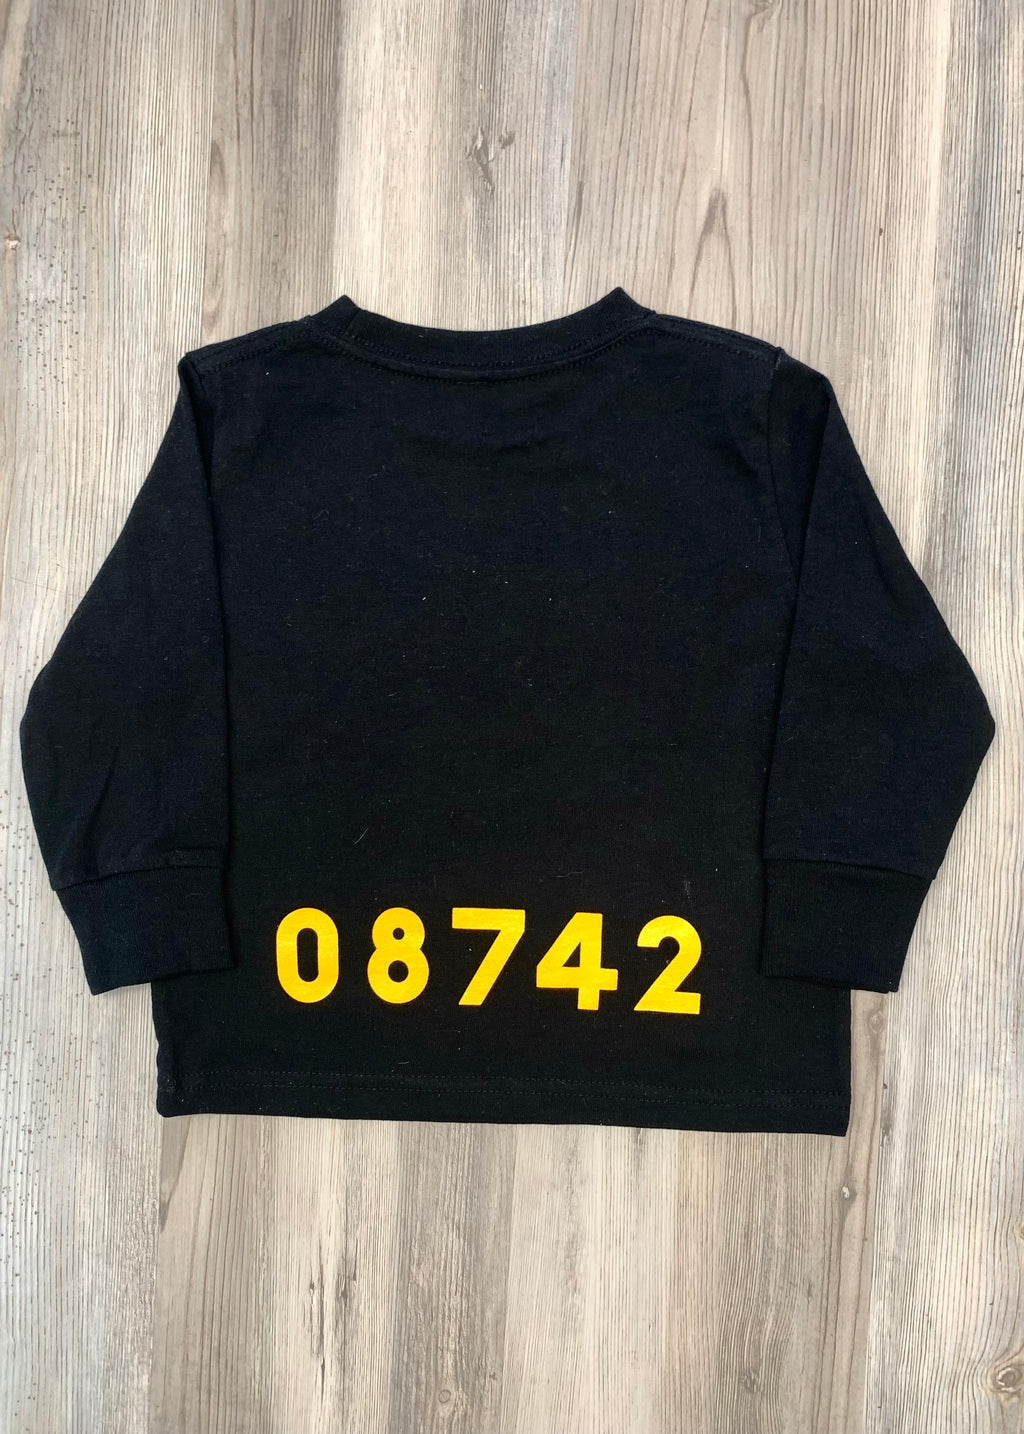 LOCAL Paw Print with 08742 Back-Toddler Long Sleeve